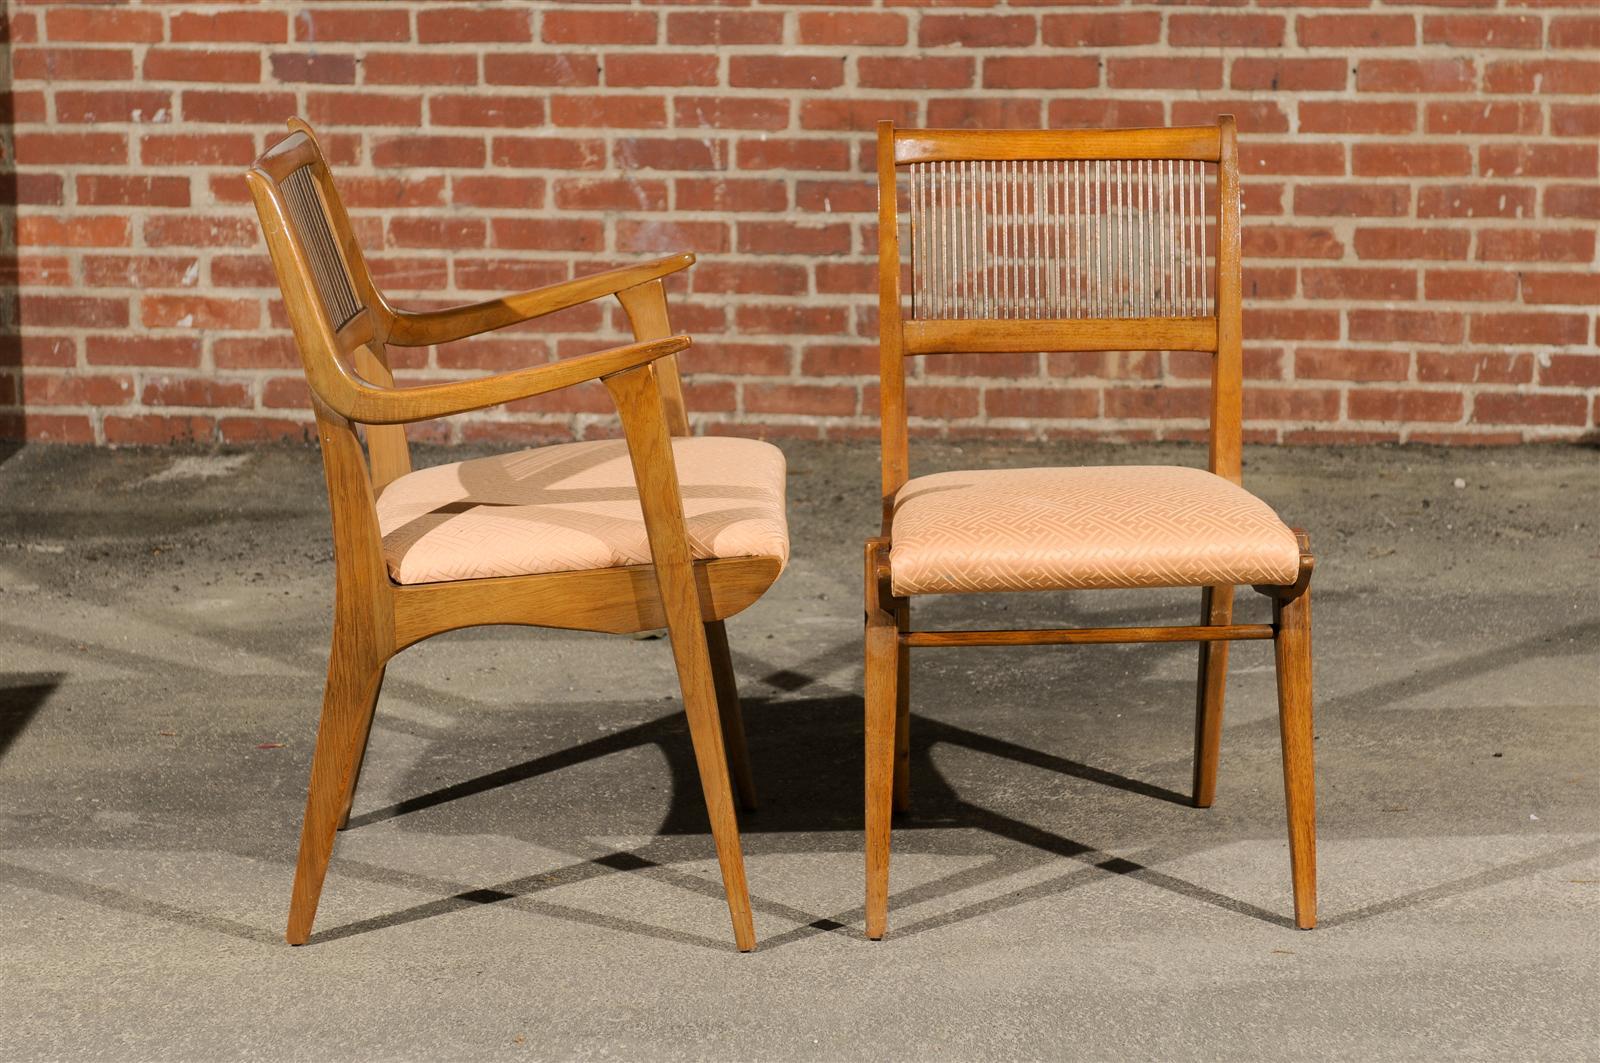 The Mid-Century Modern dining suite of ashwood is in the original condition and designed by John O. Van Koert for Drexel's Profile Series. It includes the dining table, two armchairs, and four side chairs. The chair upholstery fabric is in fair